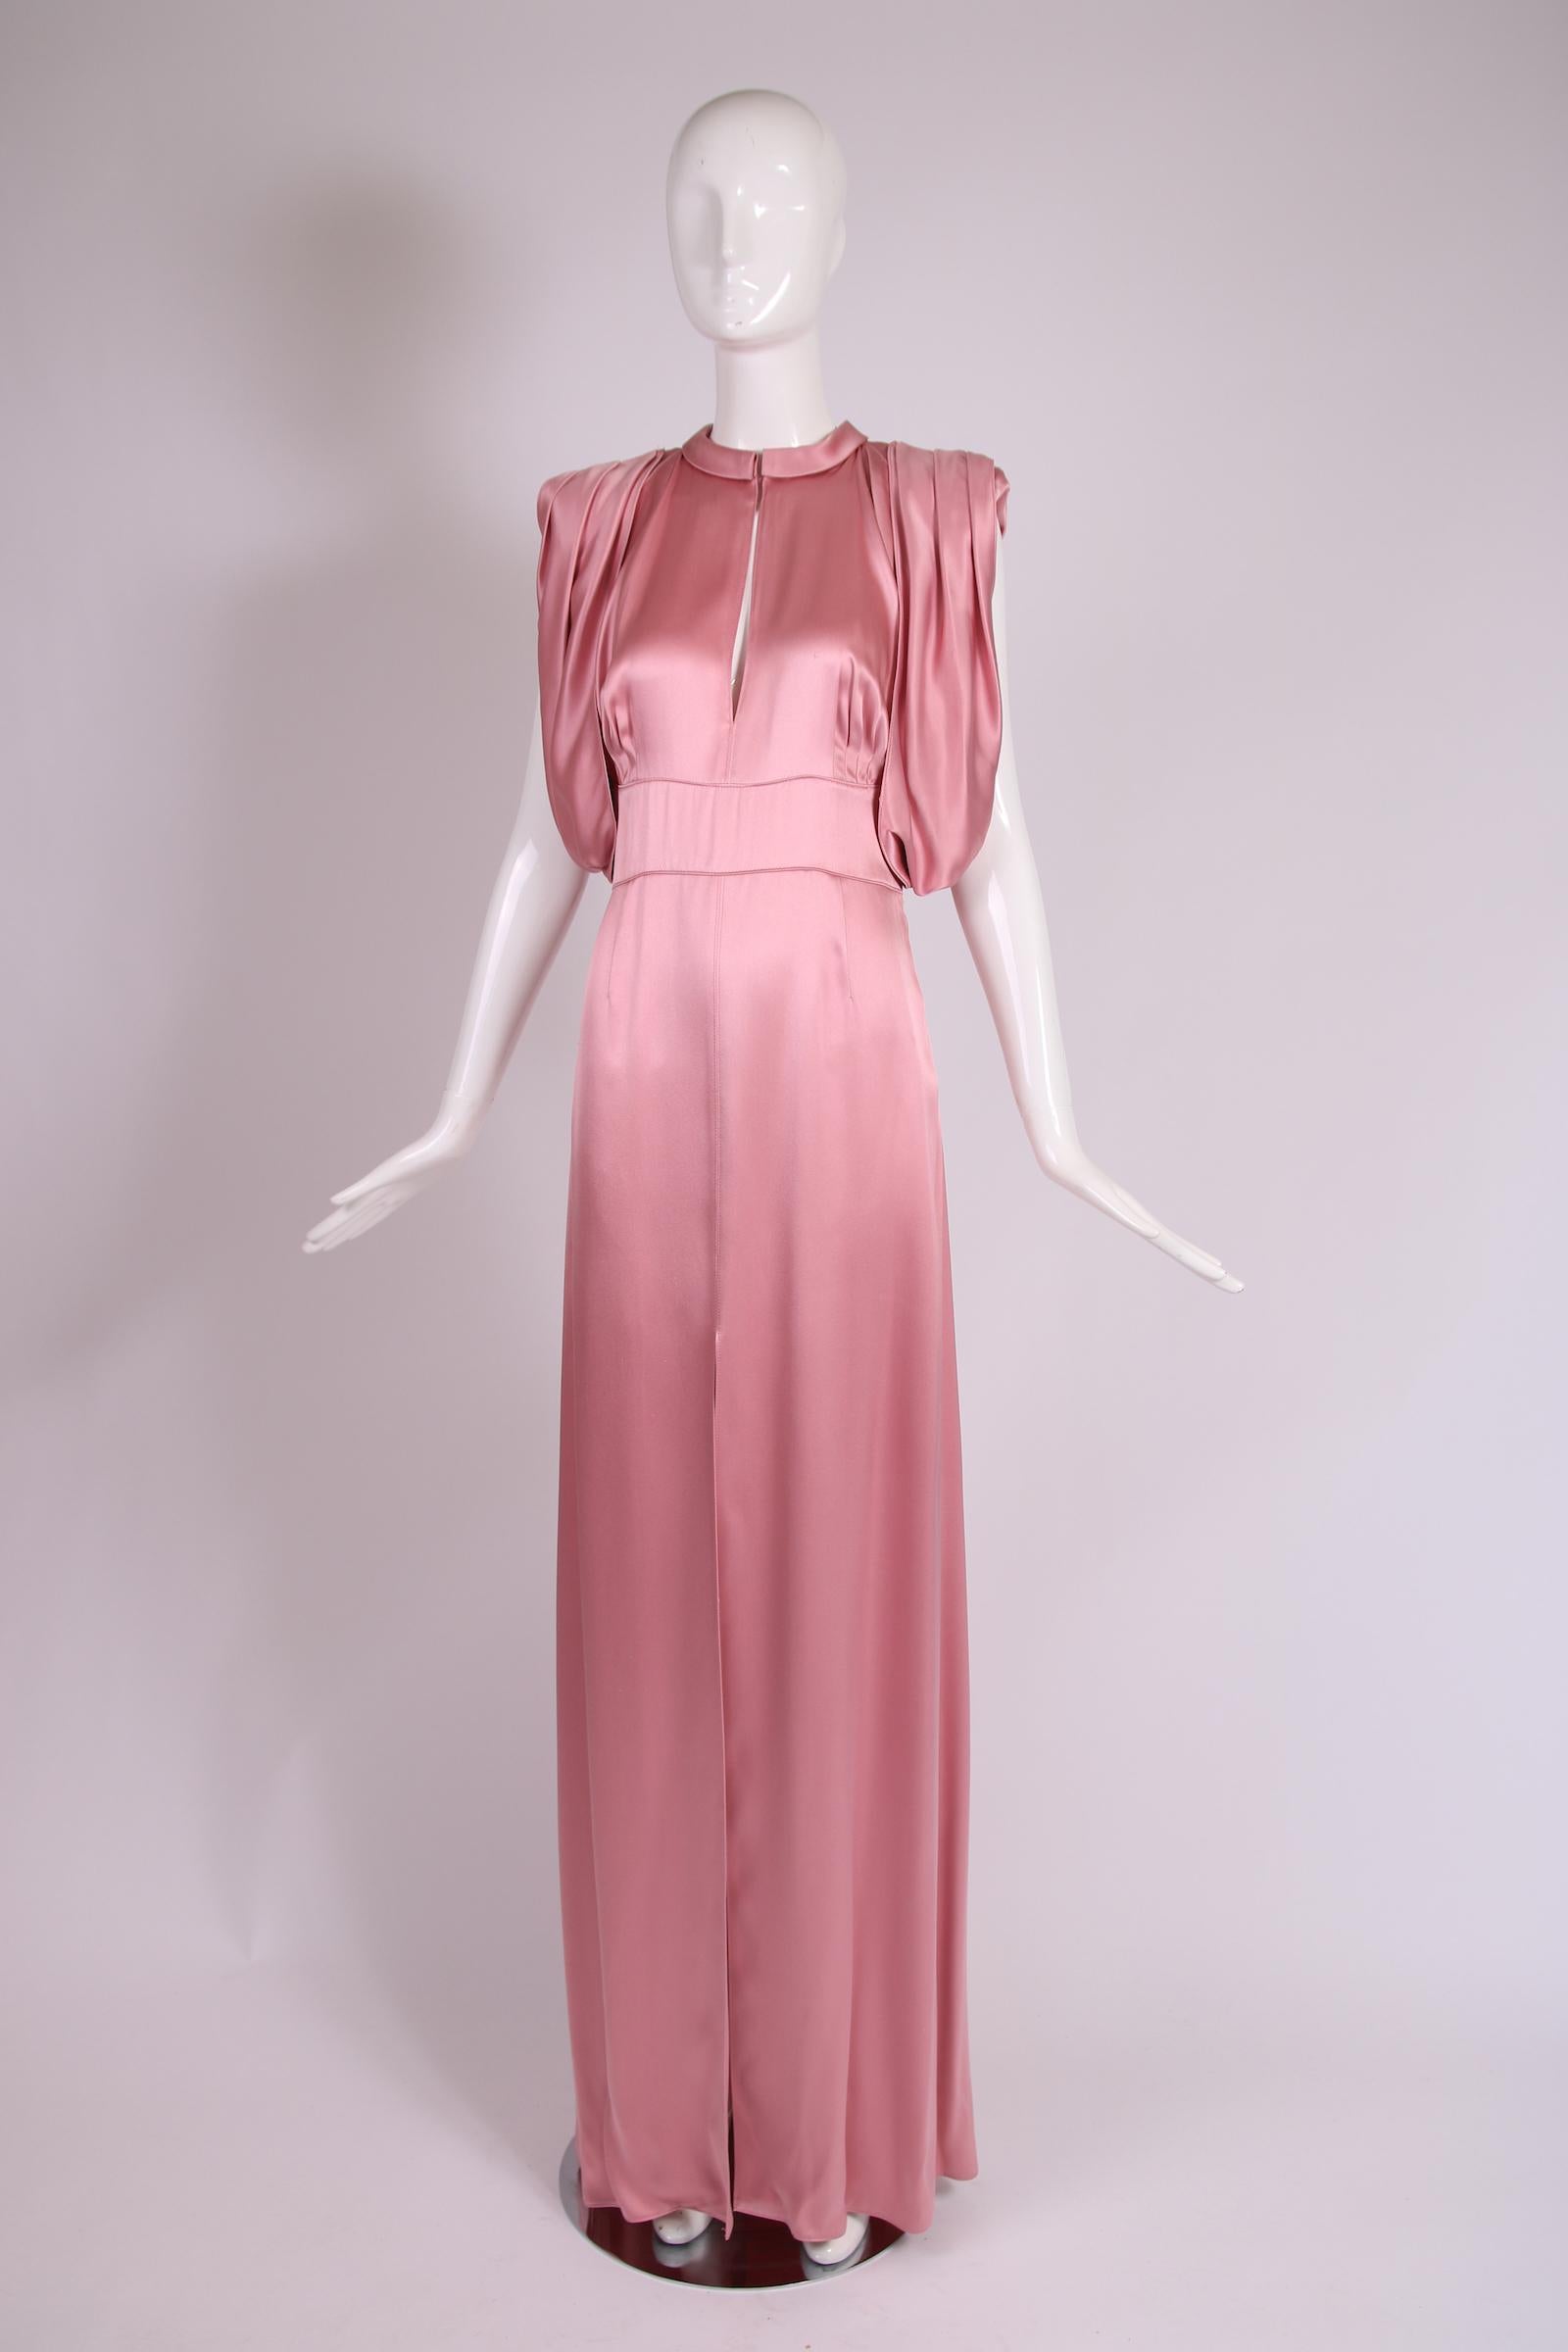 2017 Prada pink silk evening gown with a keyhole opening neckline, draped sleeves and a high frontal slit. In excellent condition with some scattered, tiny fabric abrasions. Size tag 42, fabric is a viscose/silk blend.

Bust - 34